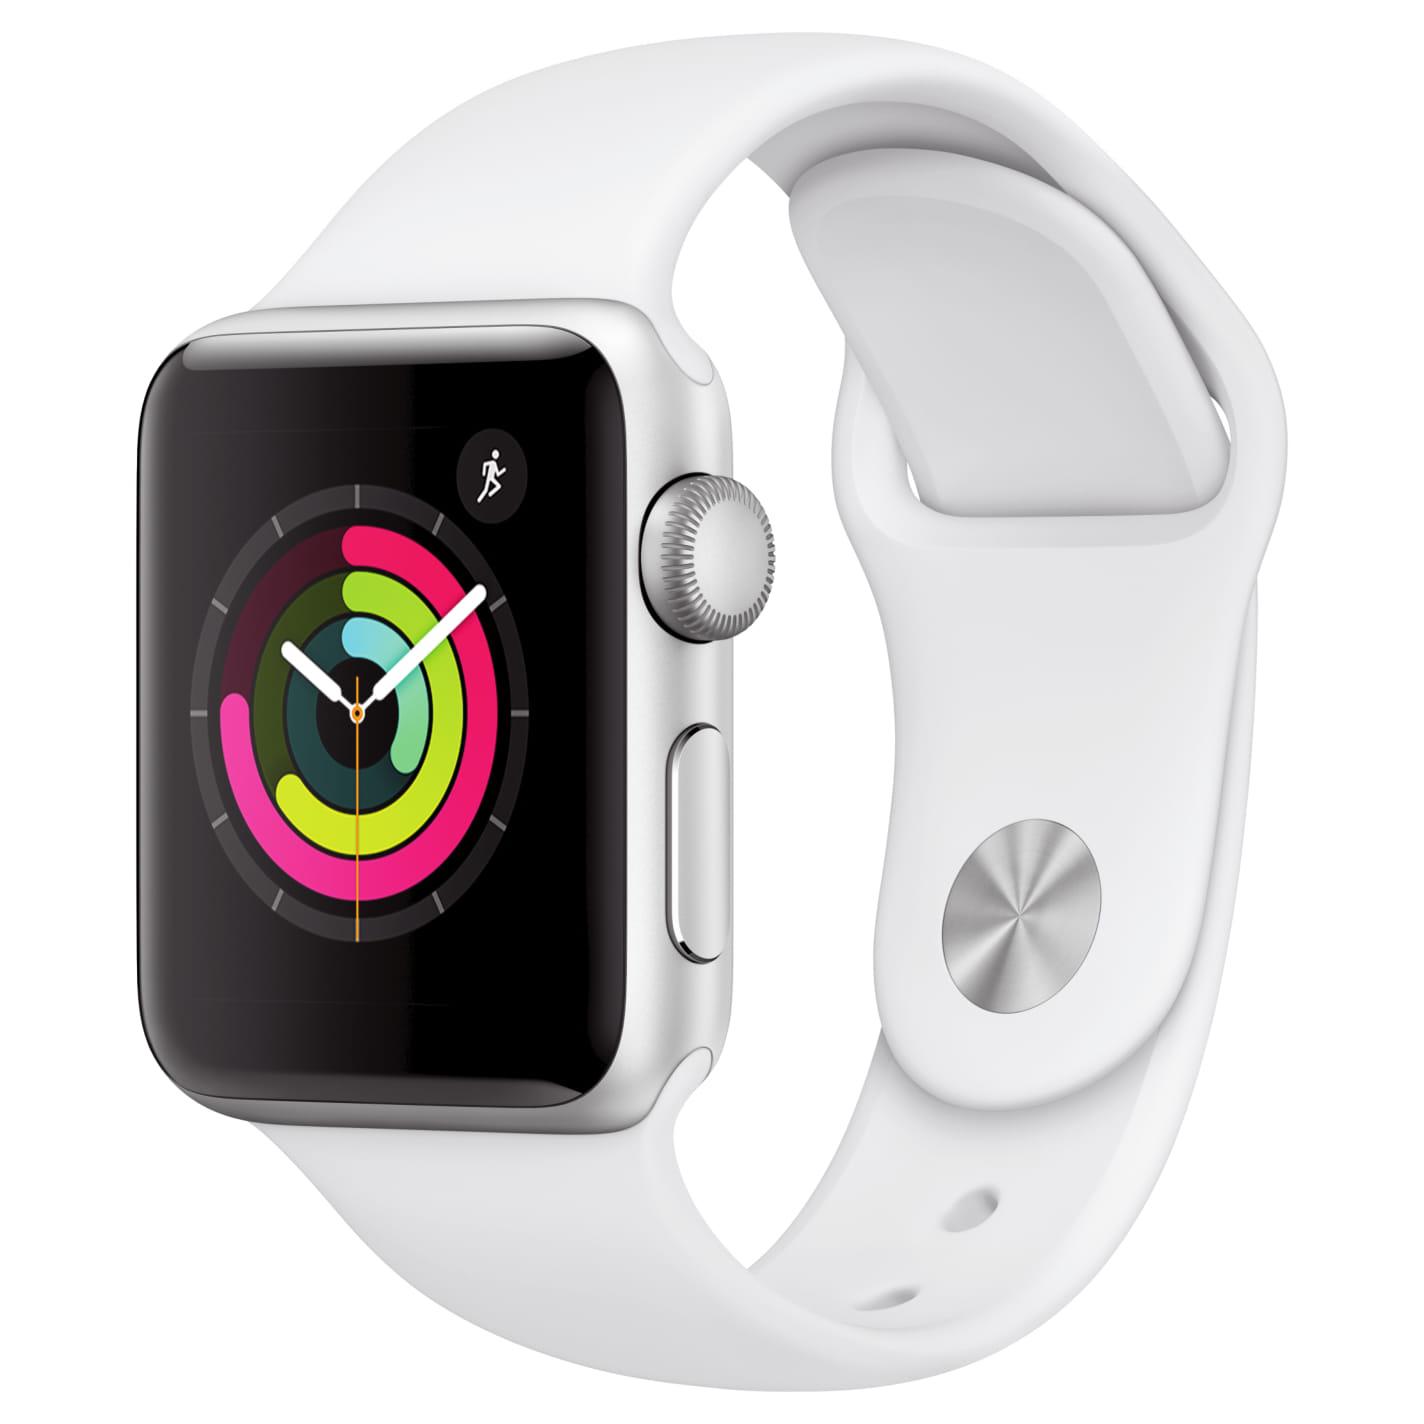 Starts Nov 25! Apple Watch Series 3 GPS Smartwatch for $119 Shipped